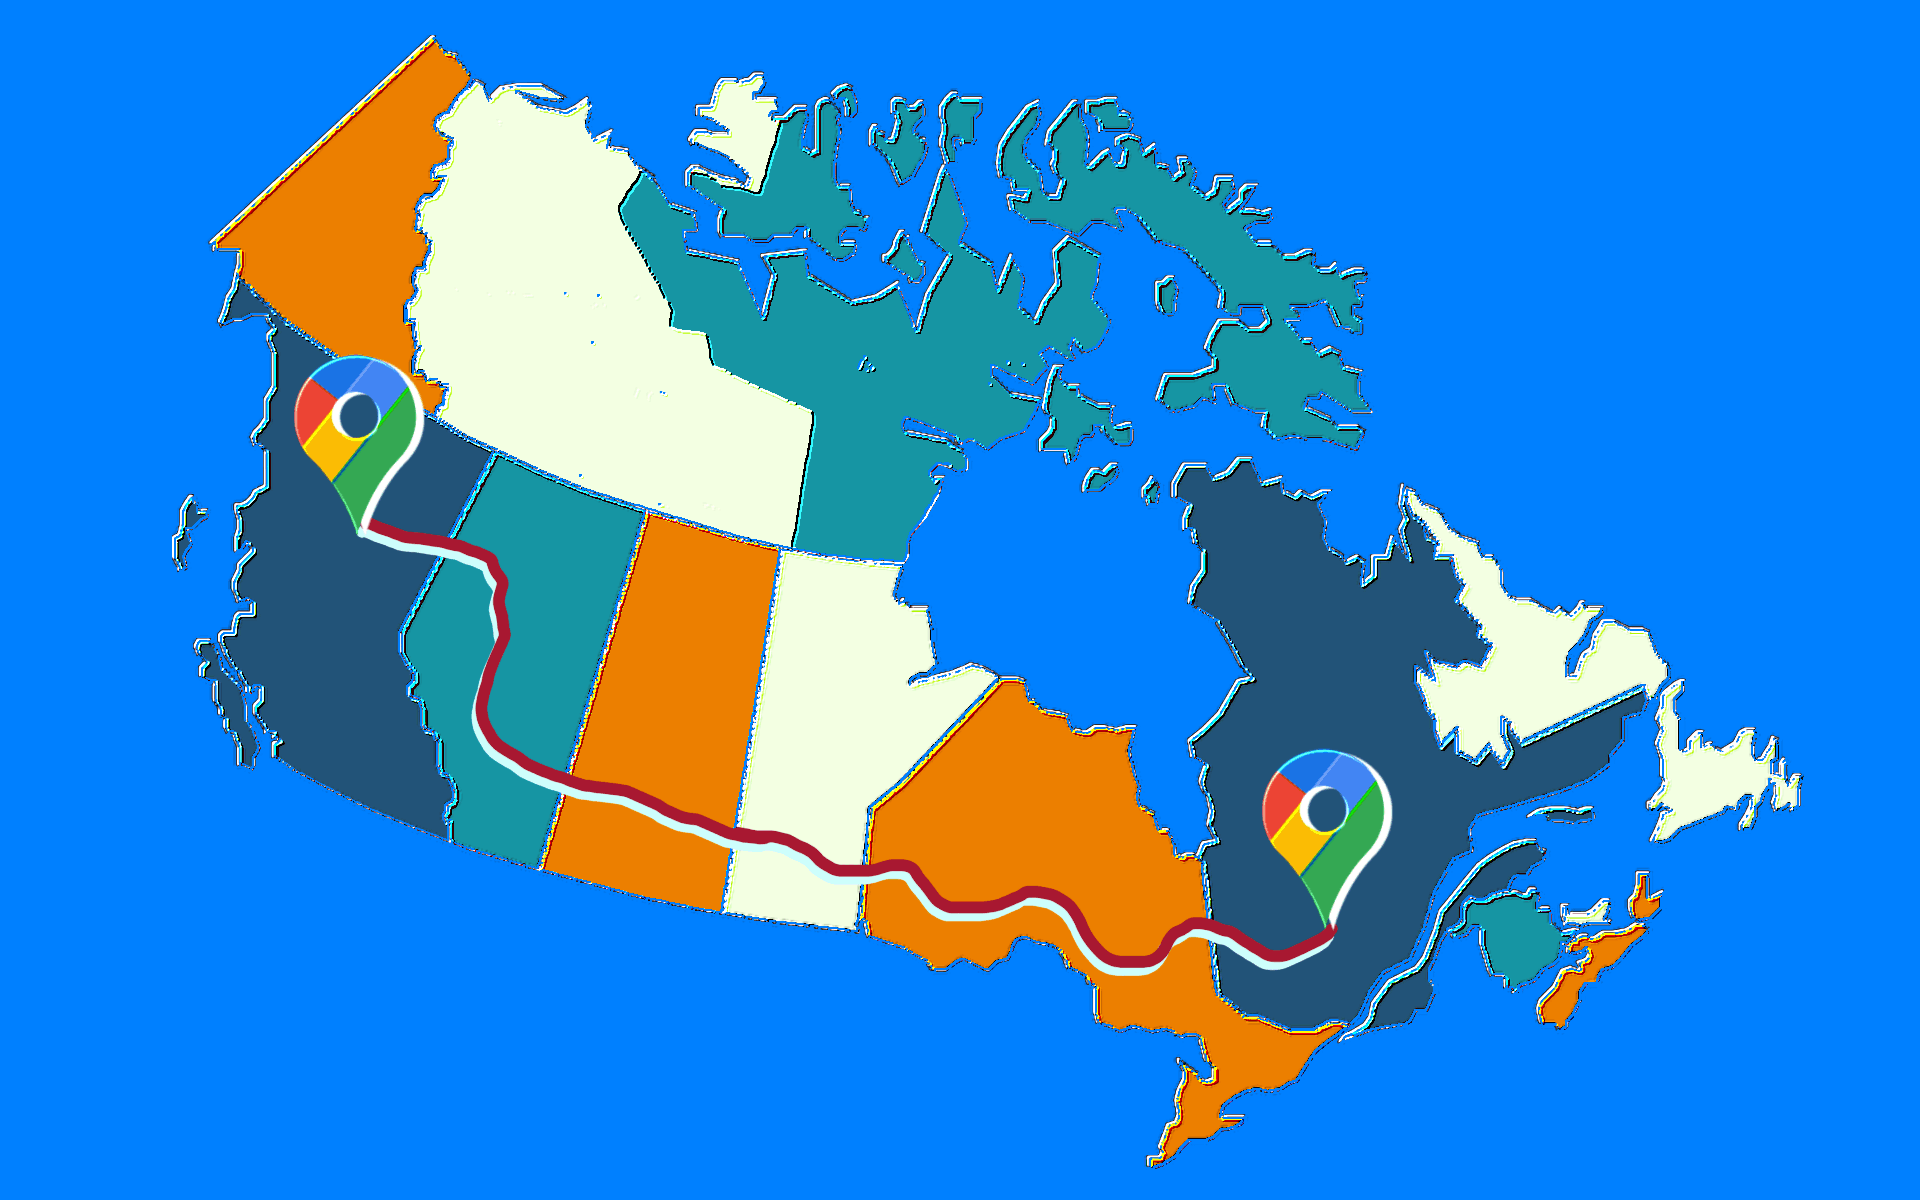 Map of Canada with a location pin in Quebec and another in British Columbia. A red trail marking a journey connects the pins